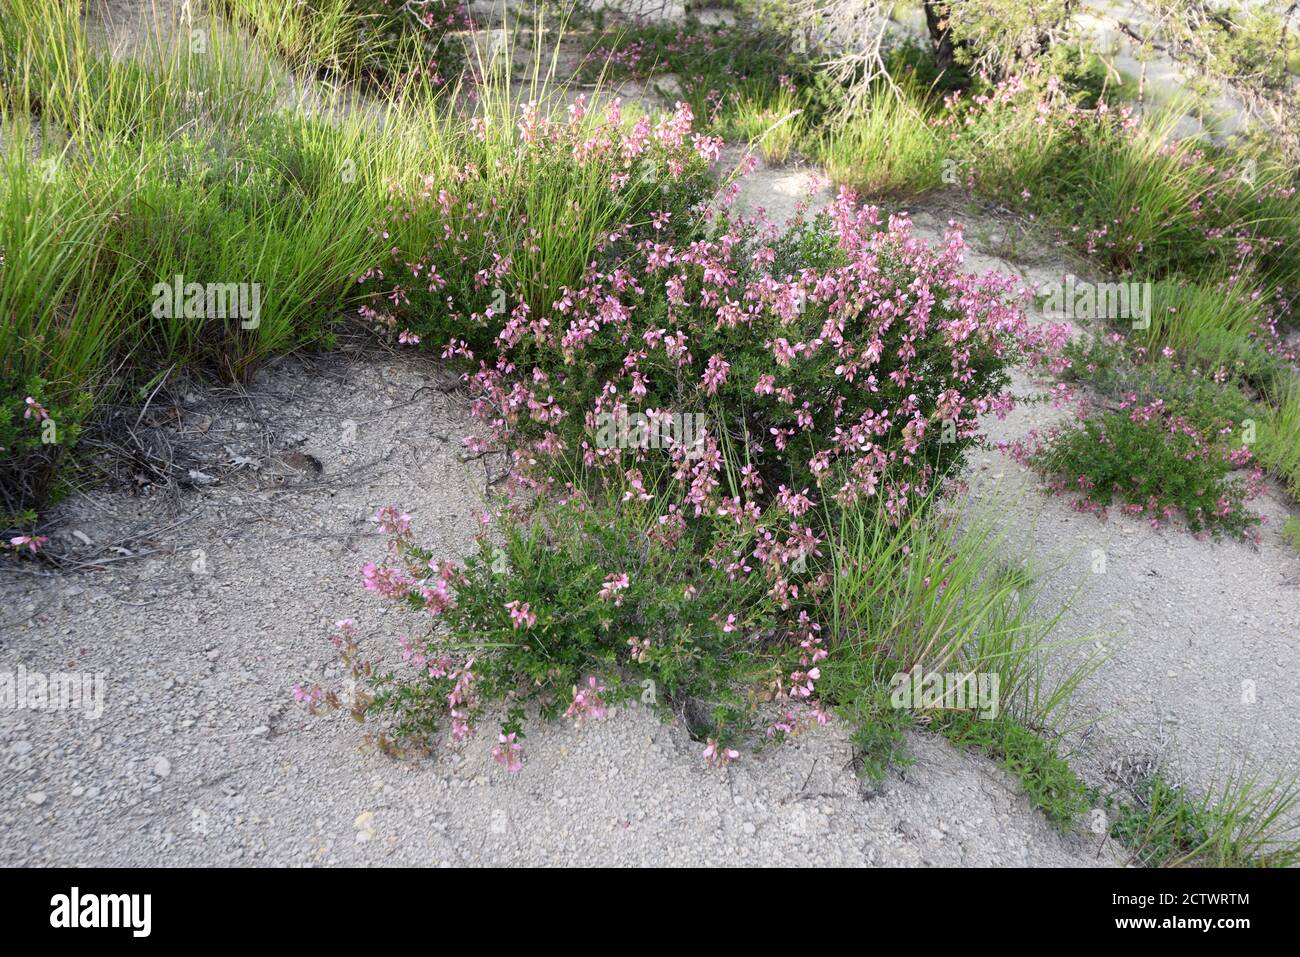 Spiny Restharrow Ononis spinosa Growing on Marlstone or Black Marl Formations known as Robines Alpes-de-Haute-Provence Provence France Stock Photo